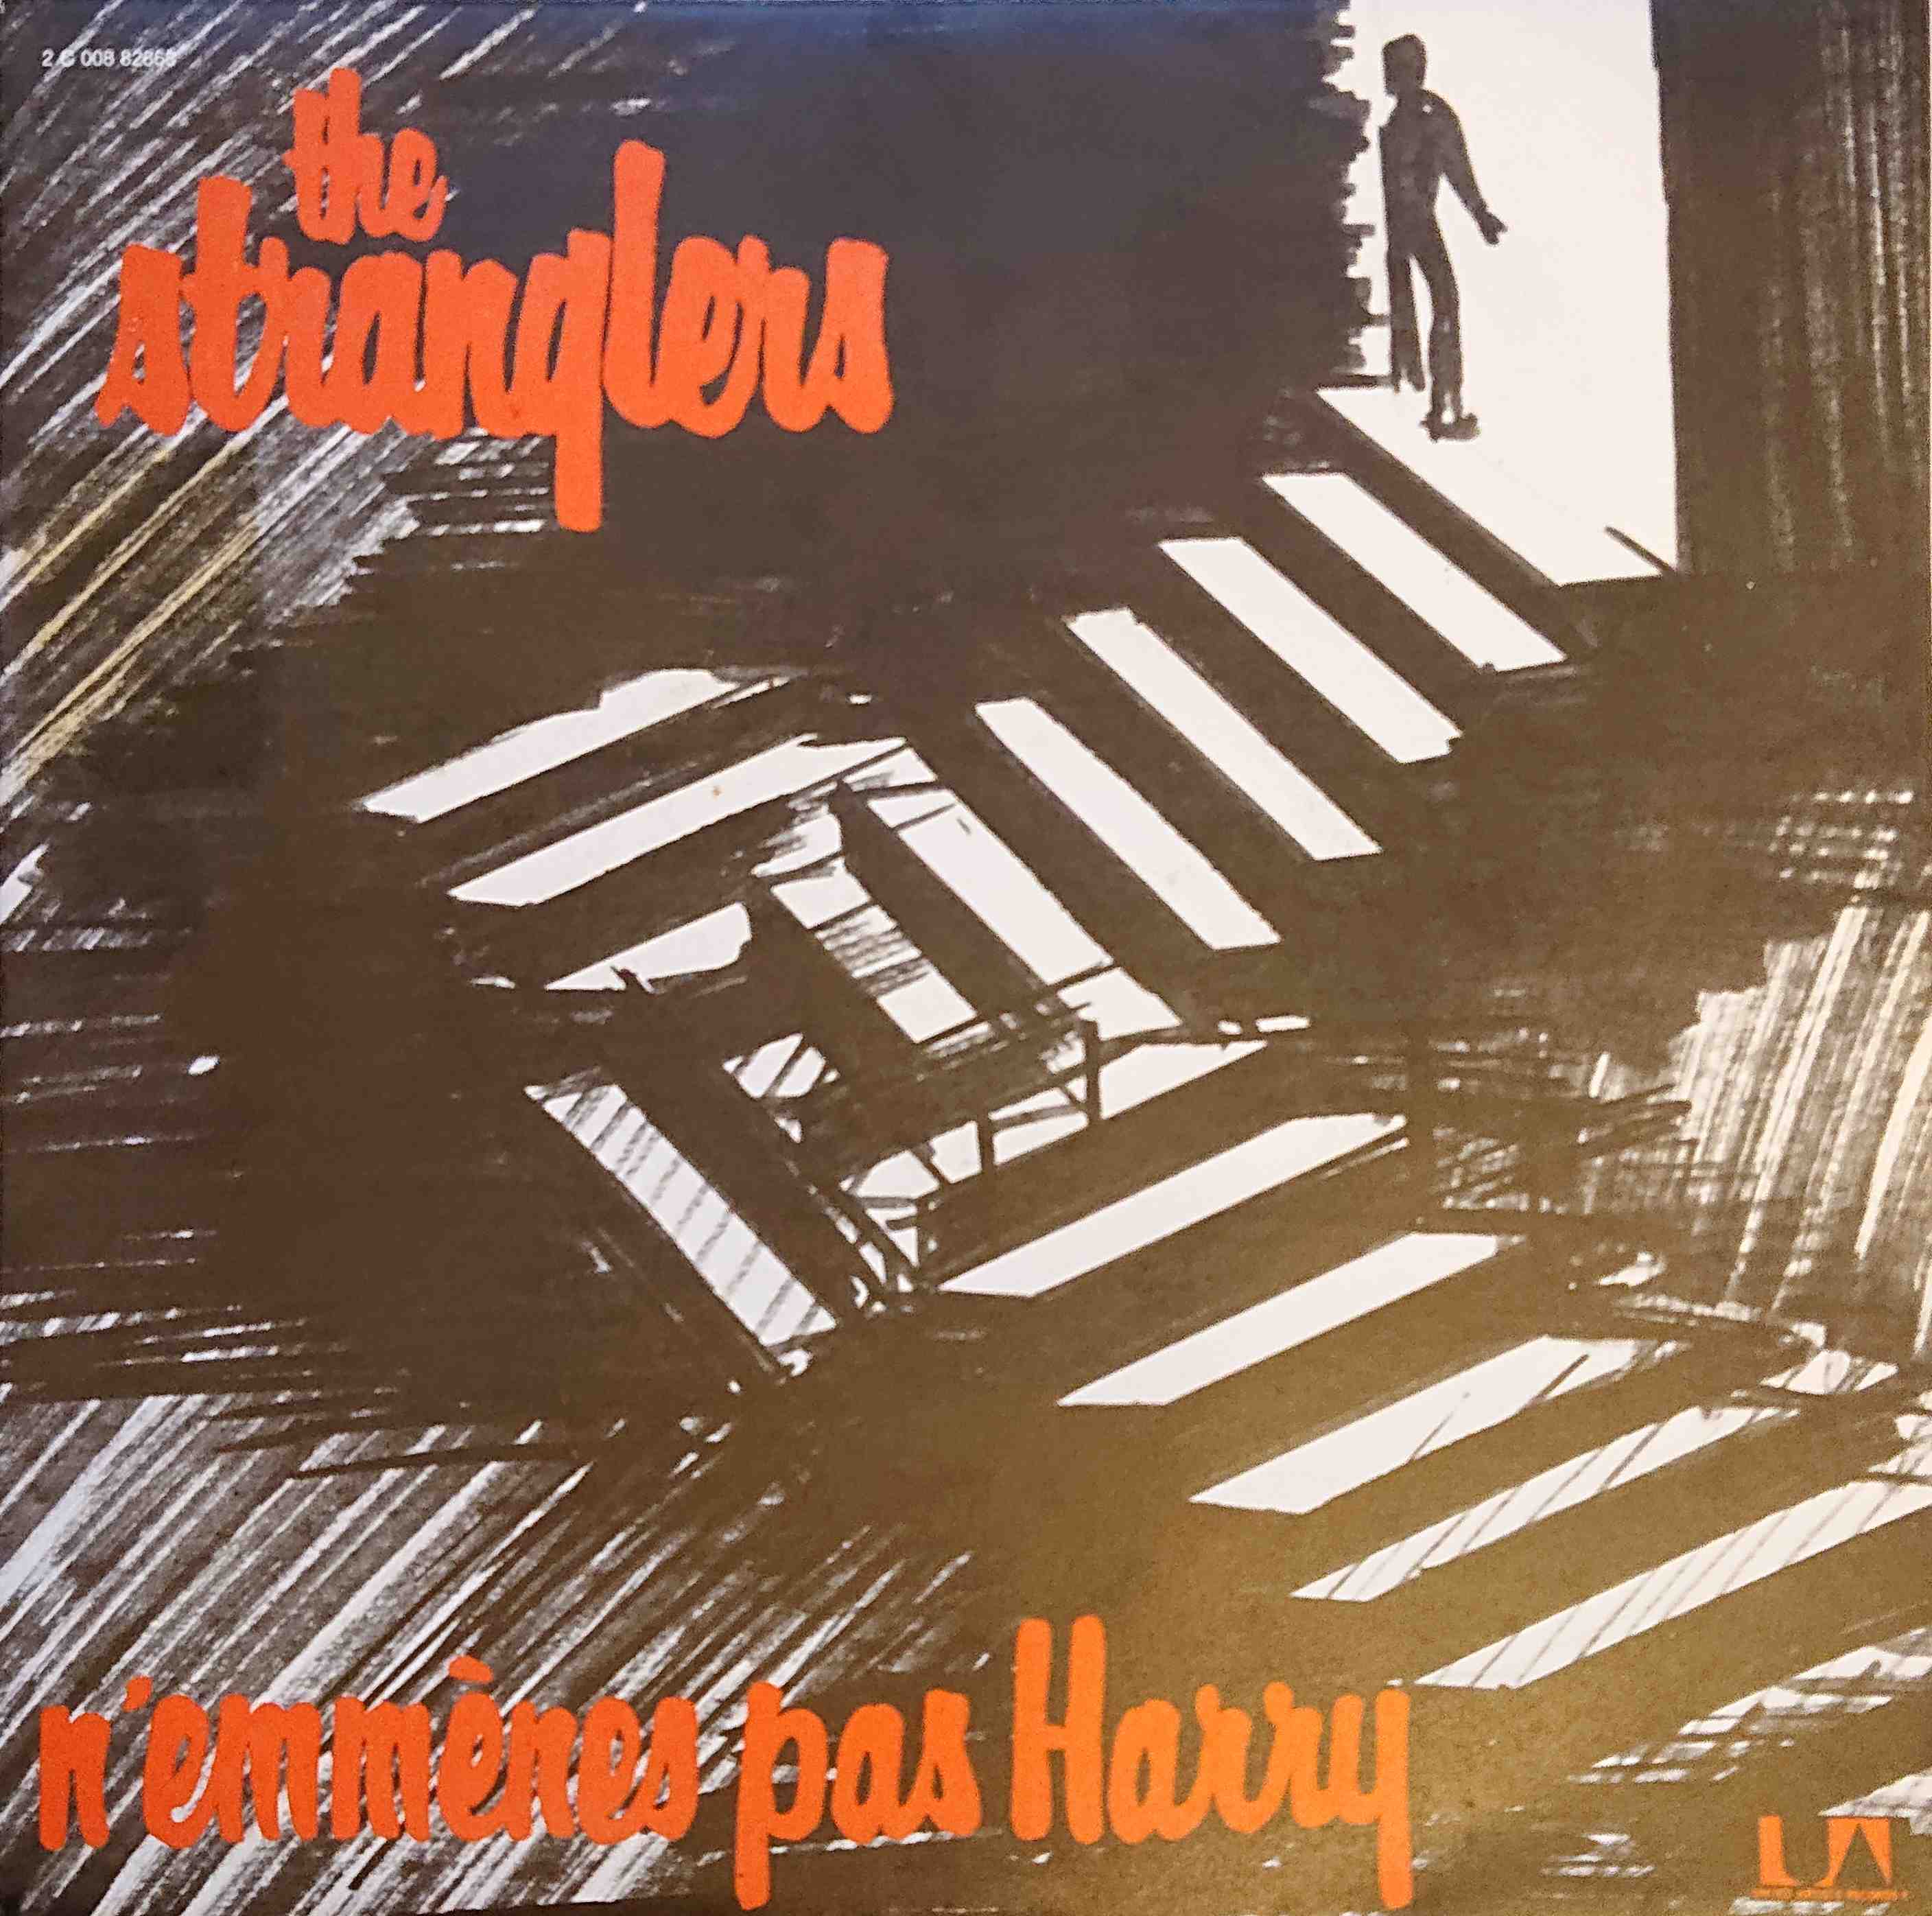 Picture of N'emmenes pas Harry by artist The Stranglers  from The Stranglers singles